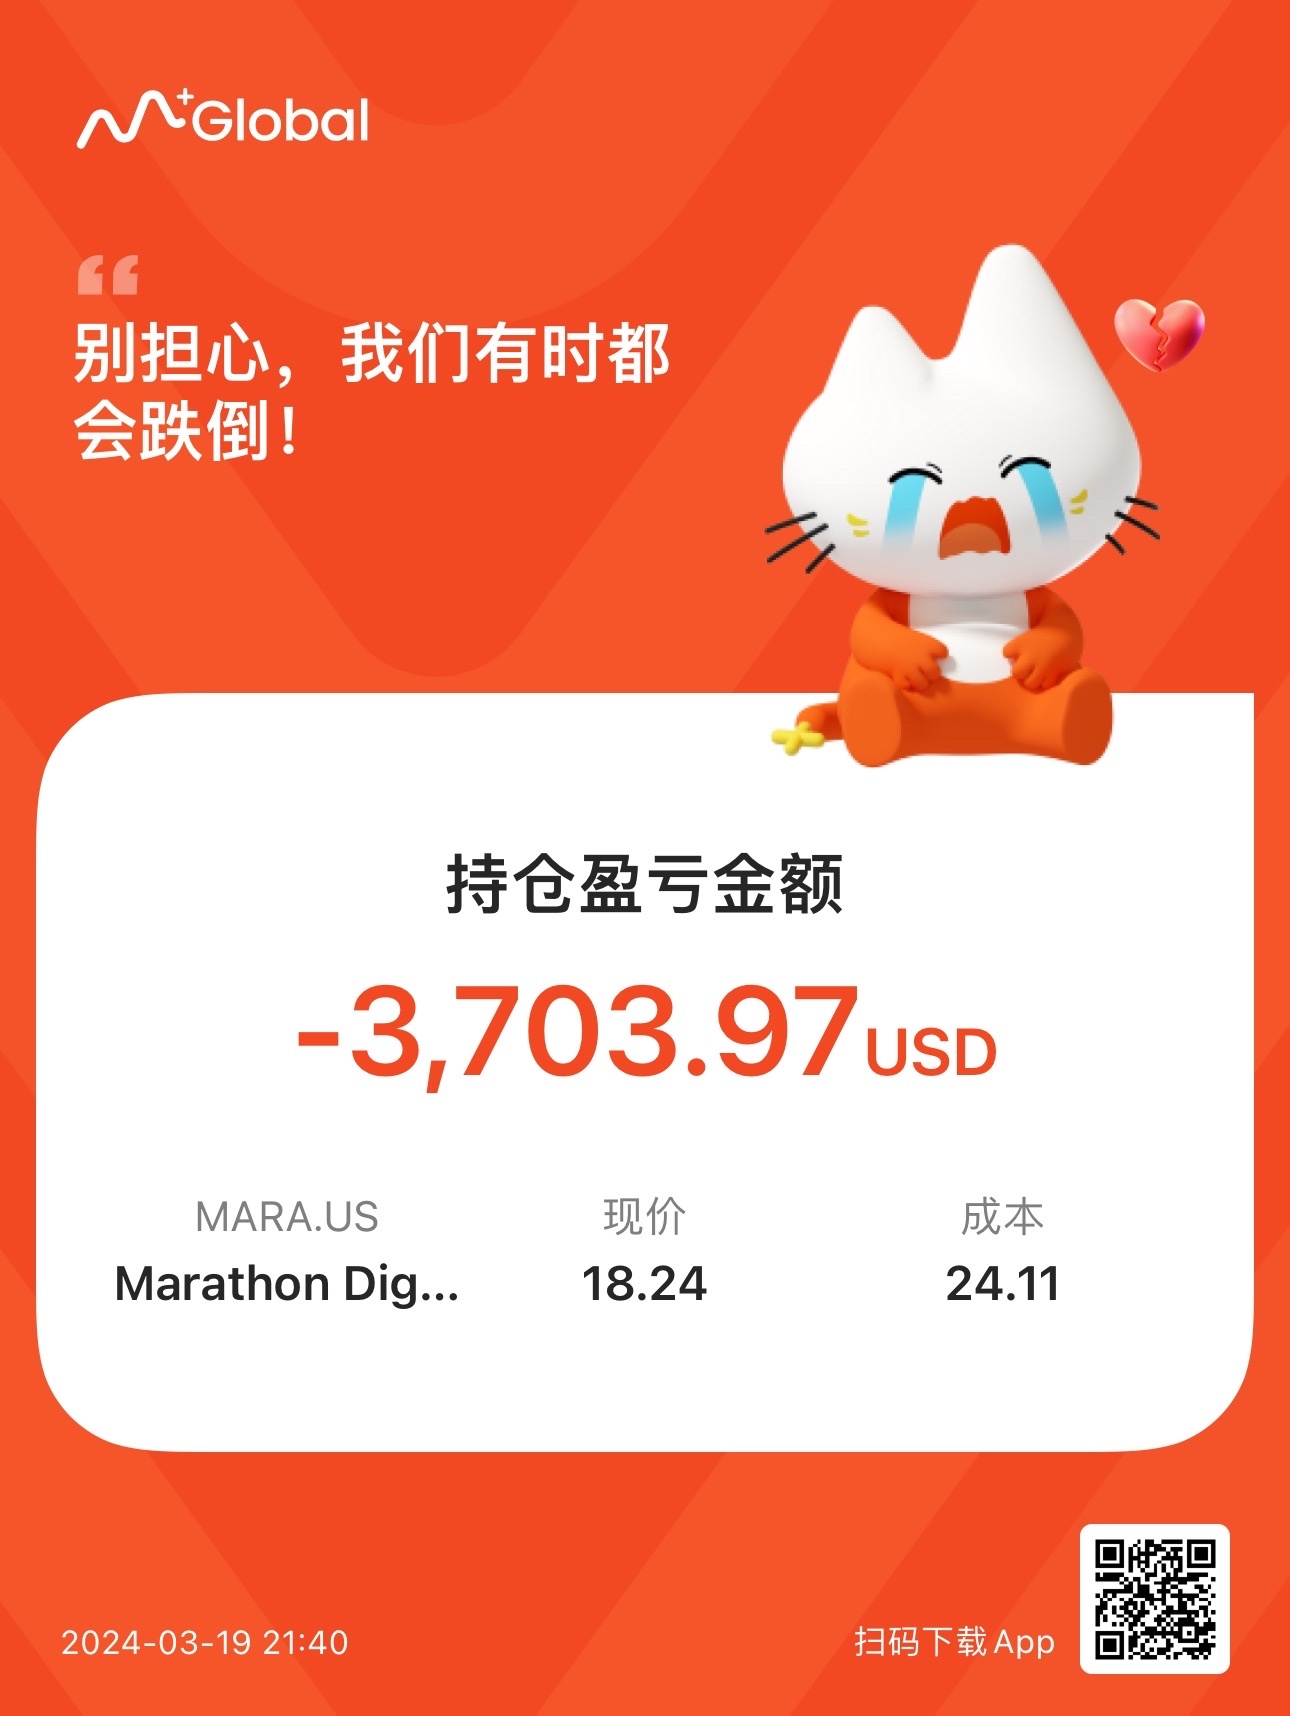 $Marathon Digital (MARA.US)$ This is just a loss on one account 💸 There's still the last amount of money left, do you think it's better to buy or stop loss? 🥺...